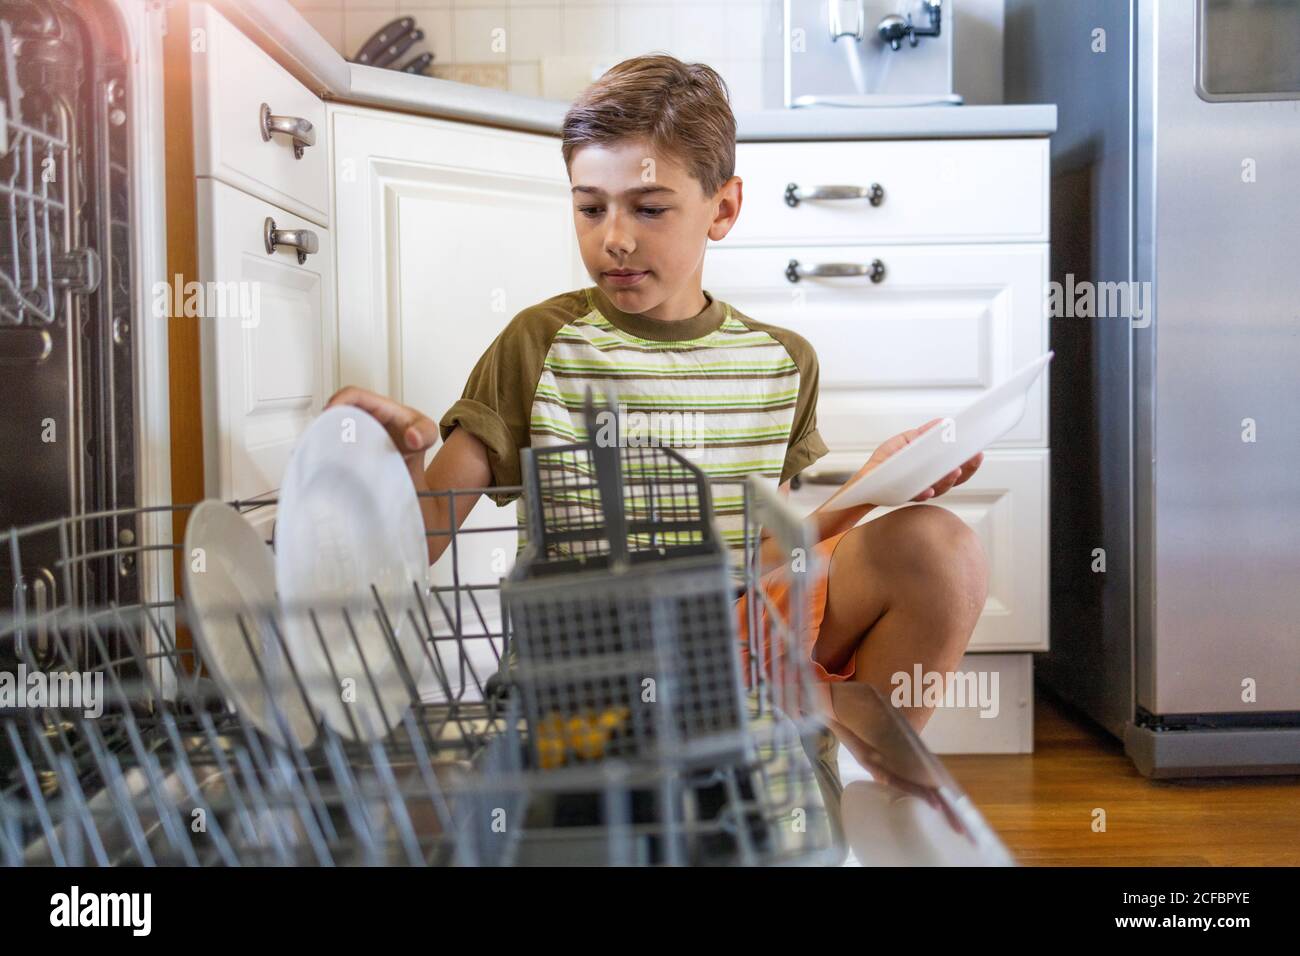 Little boy loading the dishwasher at home Stock Photo